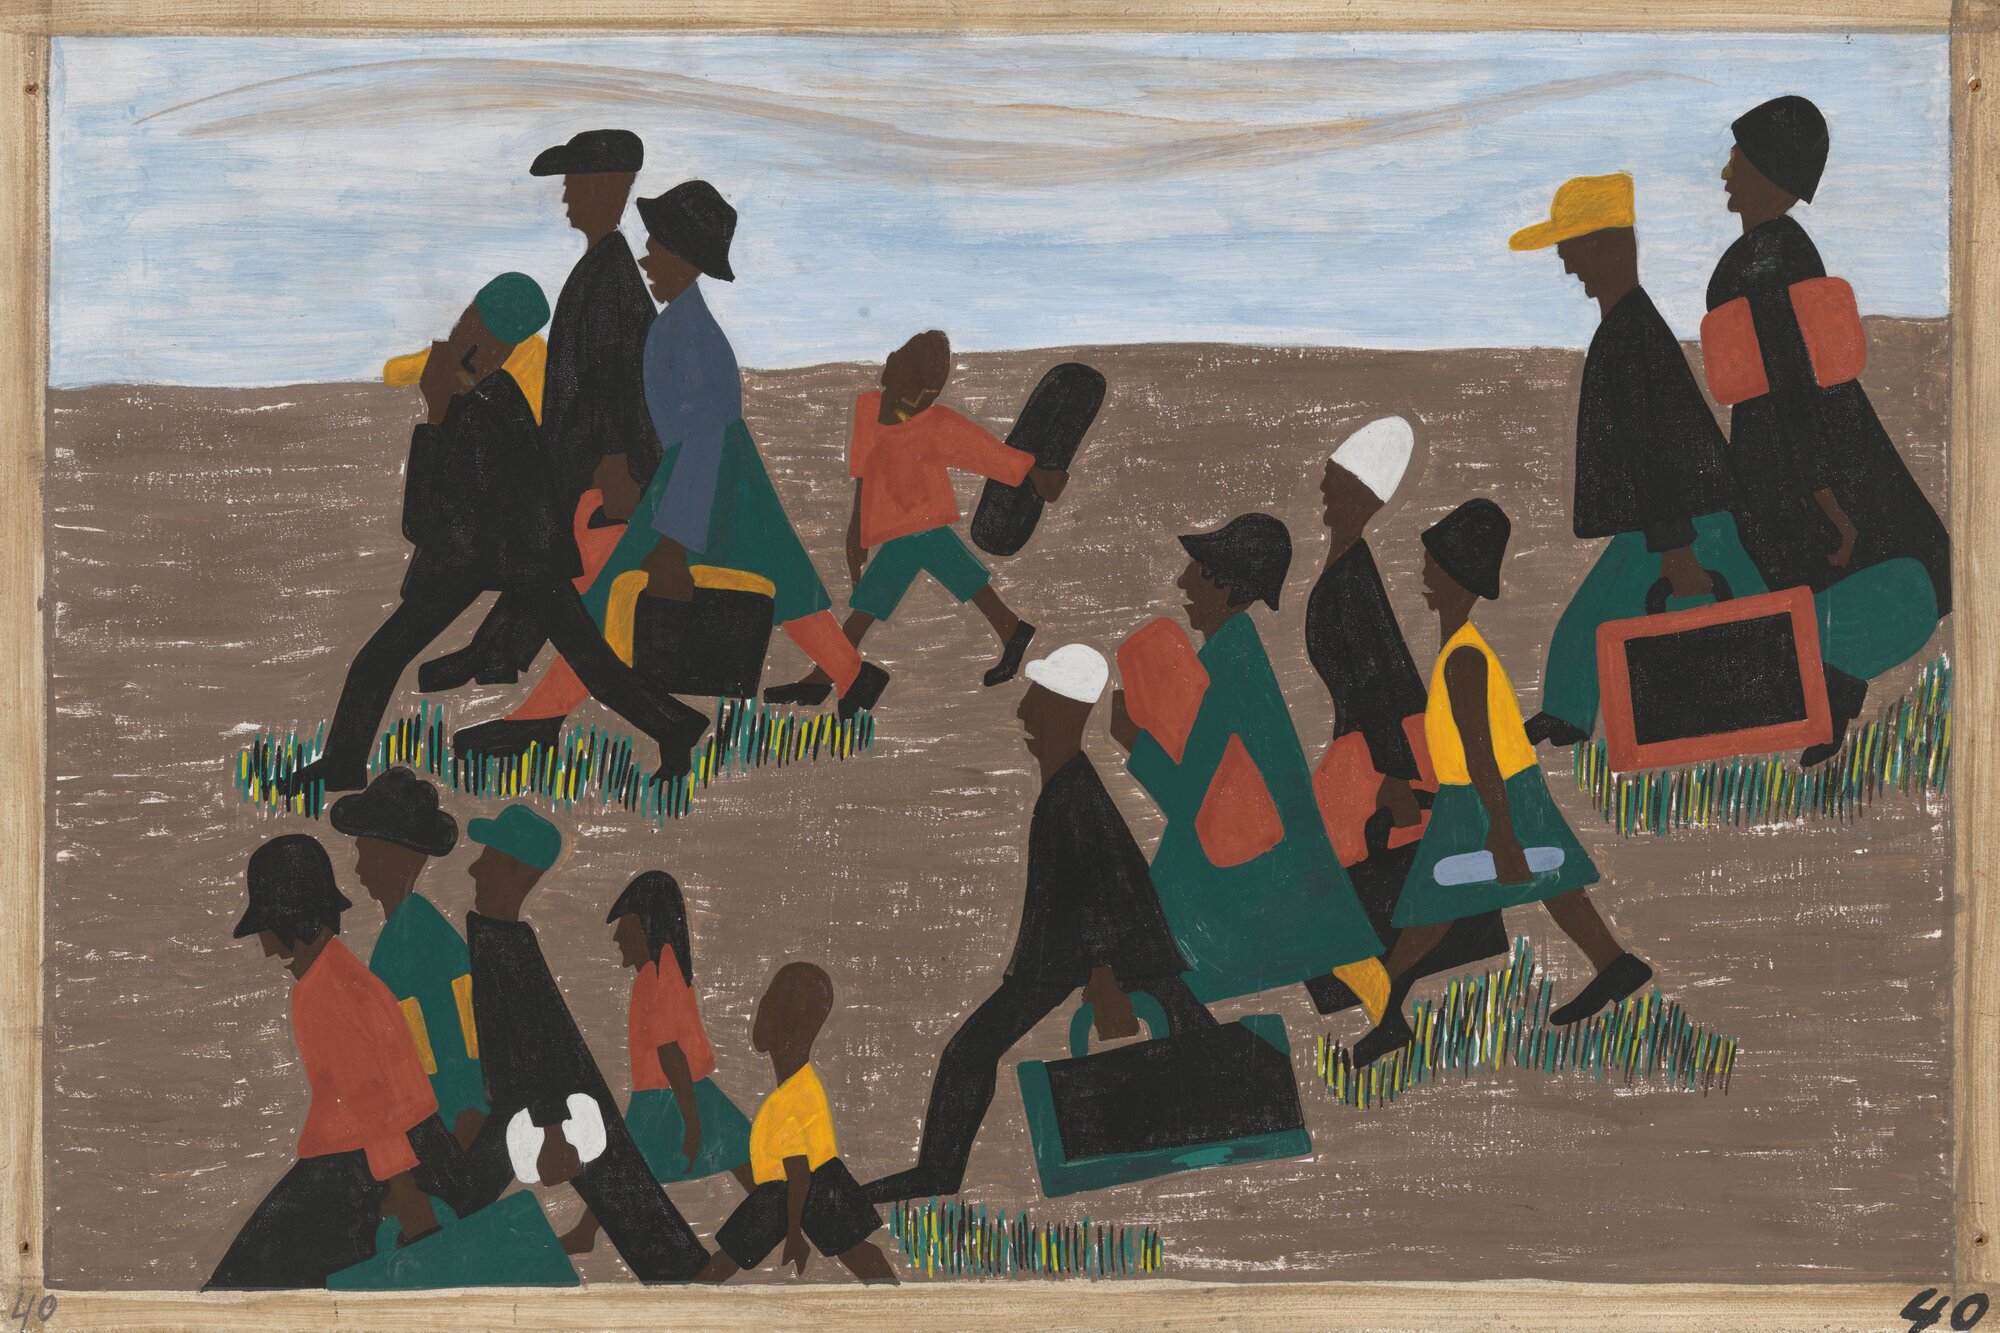 OneWay Ticket Jacob Lawrence’s Migration Series and Other Visions of